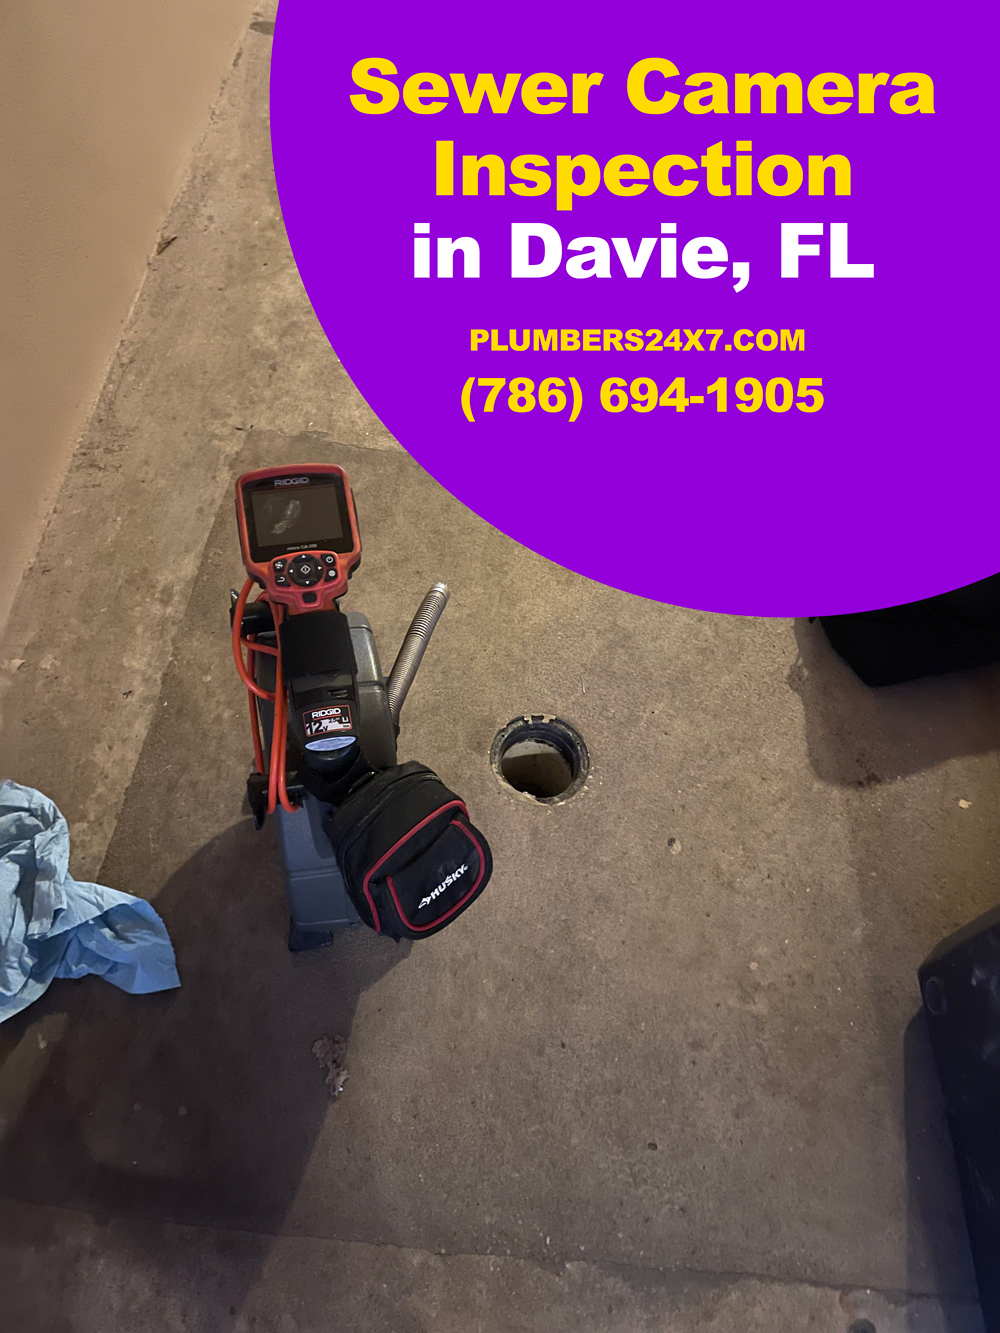 Sewer Camera Inspection in Davie